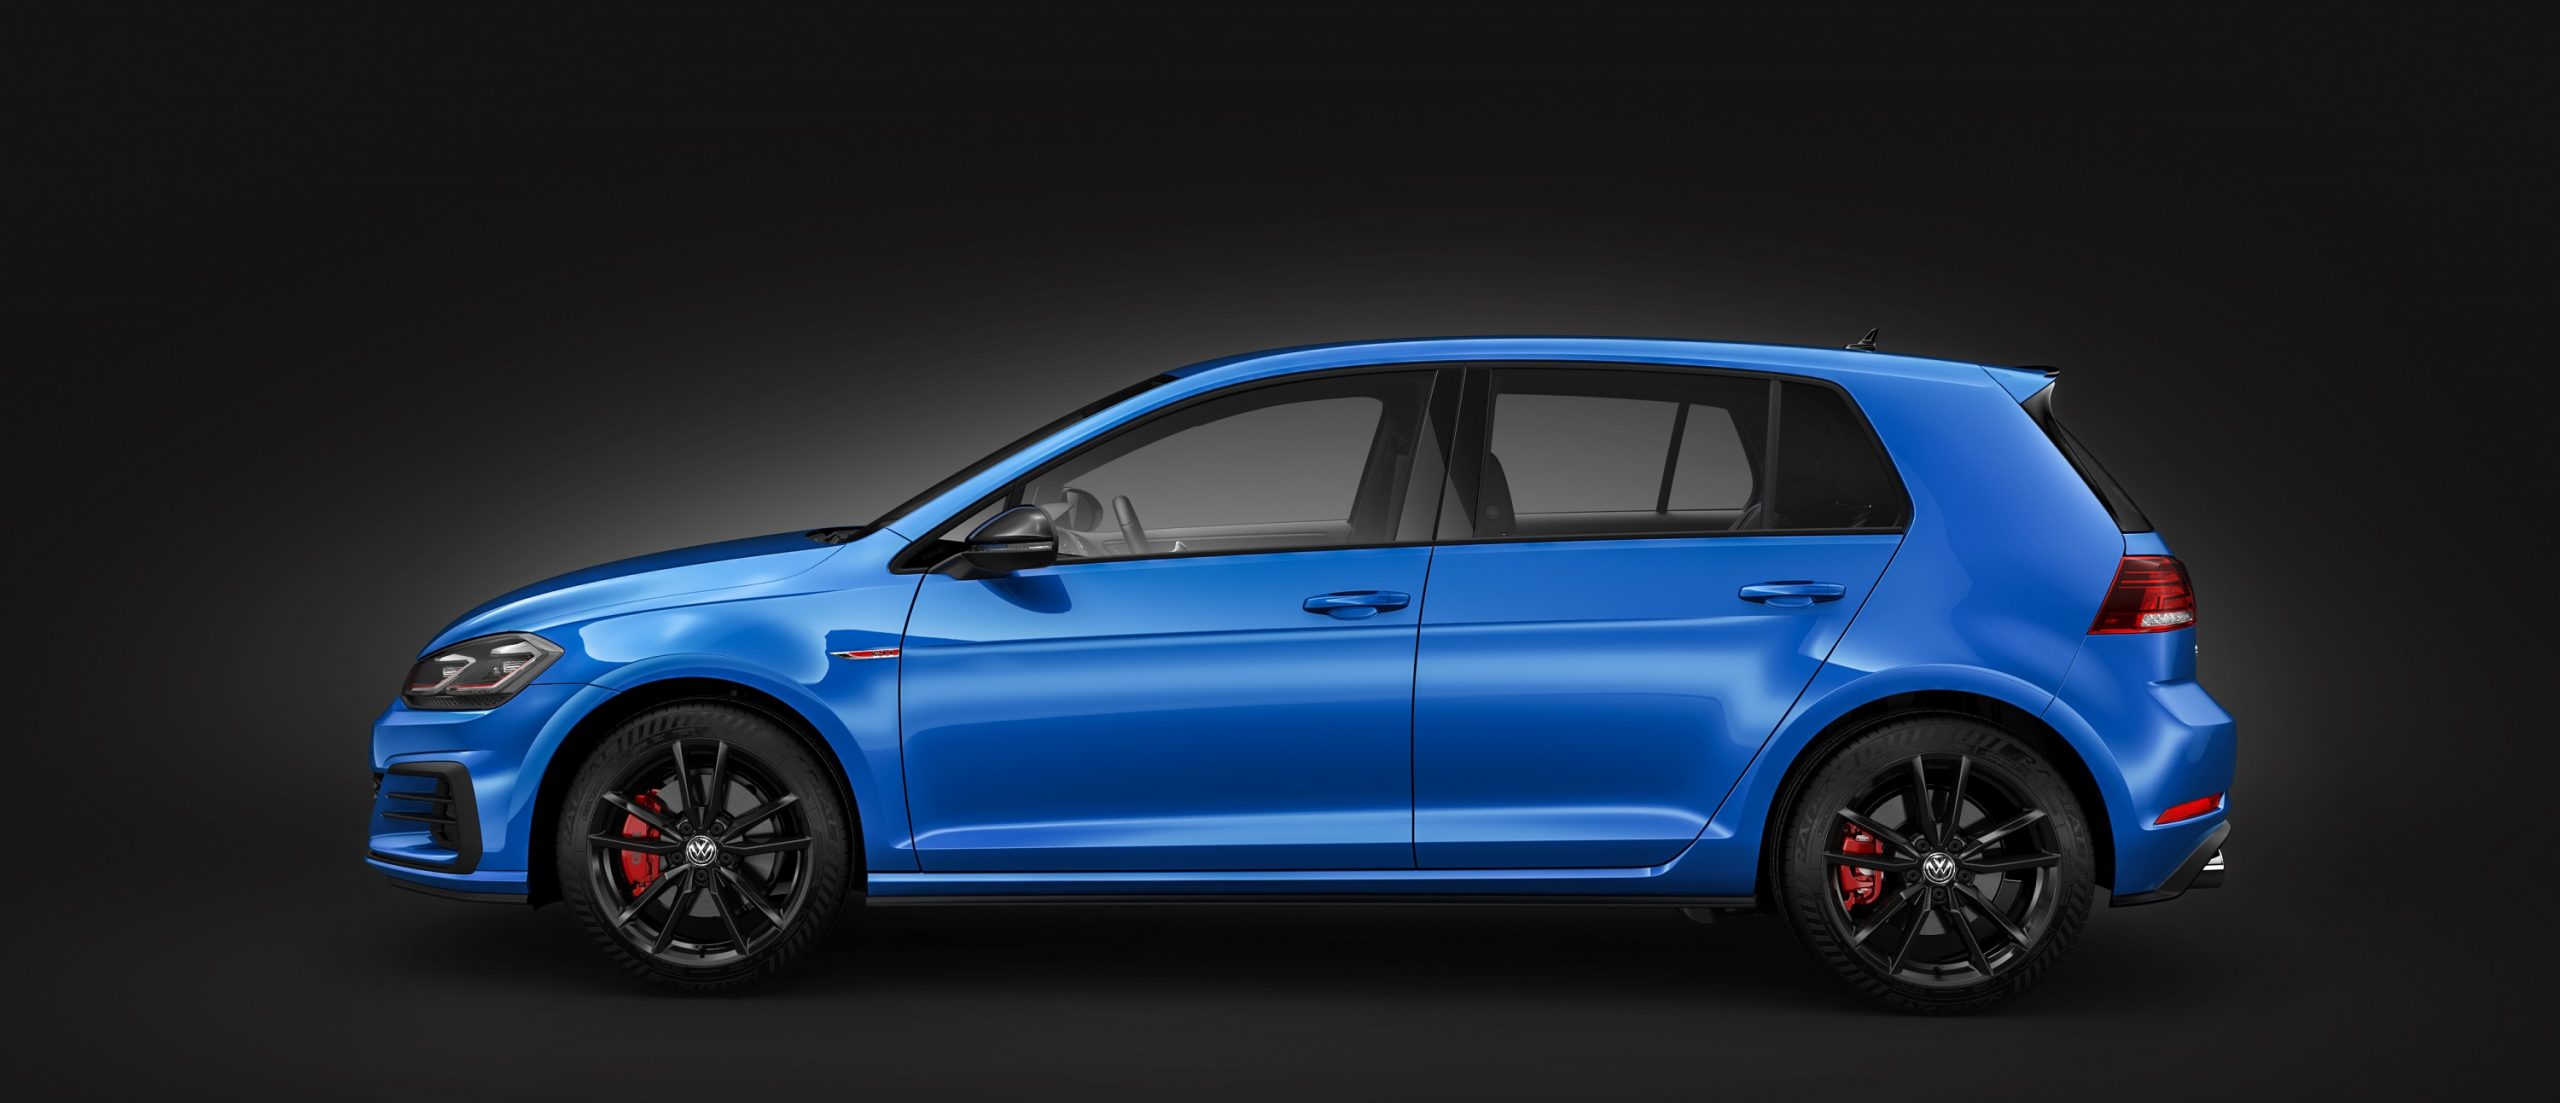 The Honda Civic Type R's main competitor, the Volkswagen GTI, shot in profile with Cornflower Blue paint